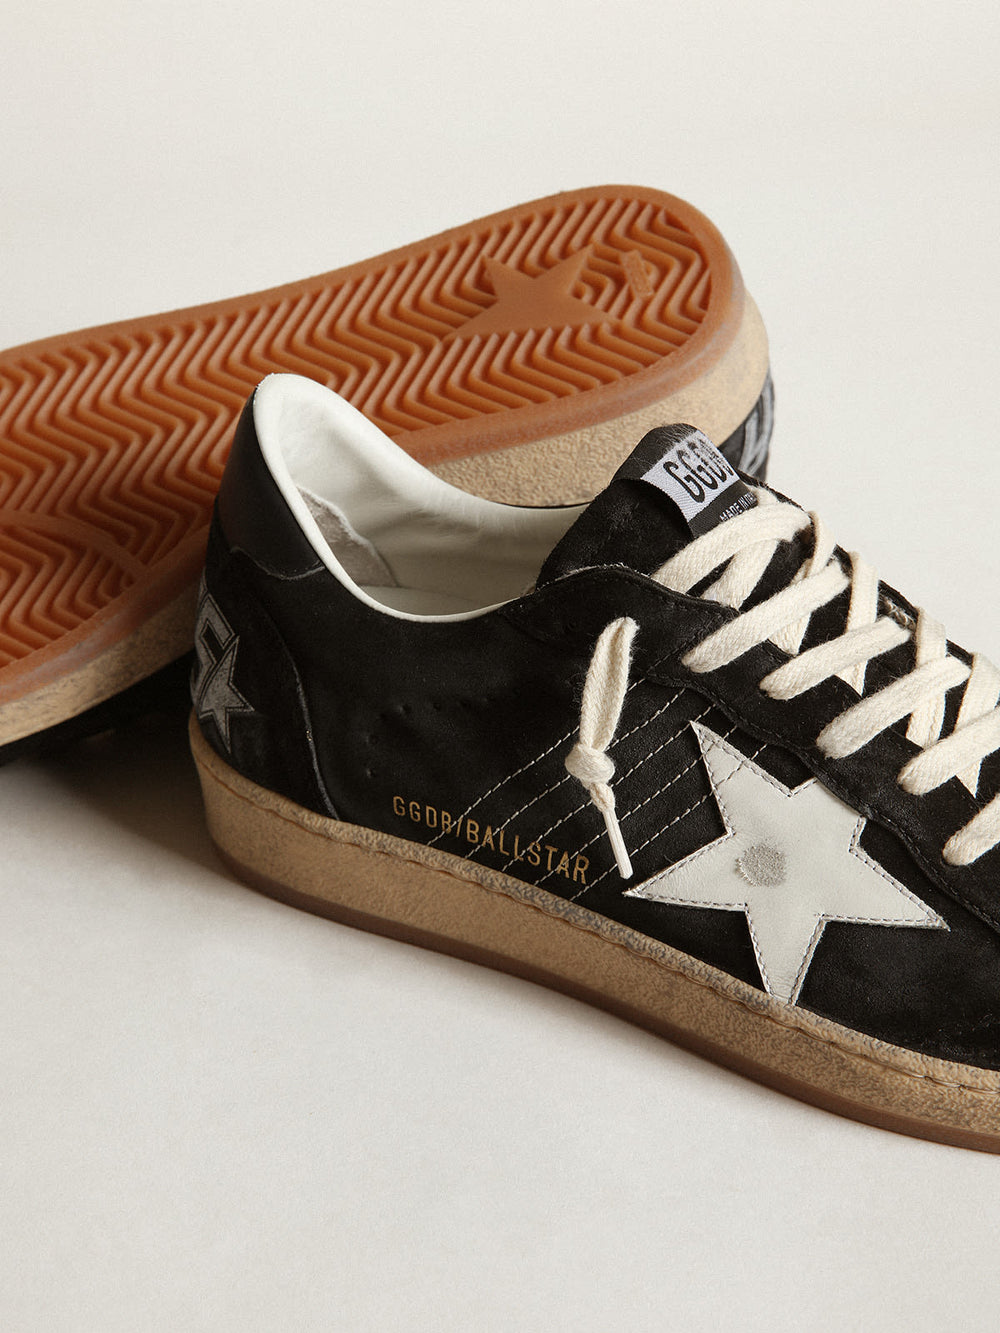 Ball Star in Black Suede w/ White Leather Star